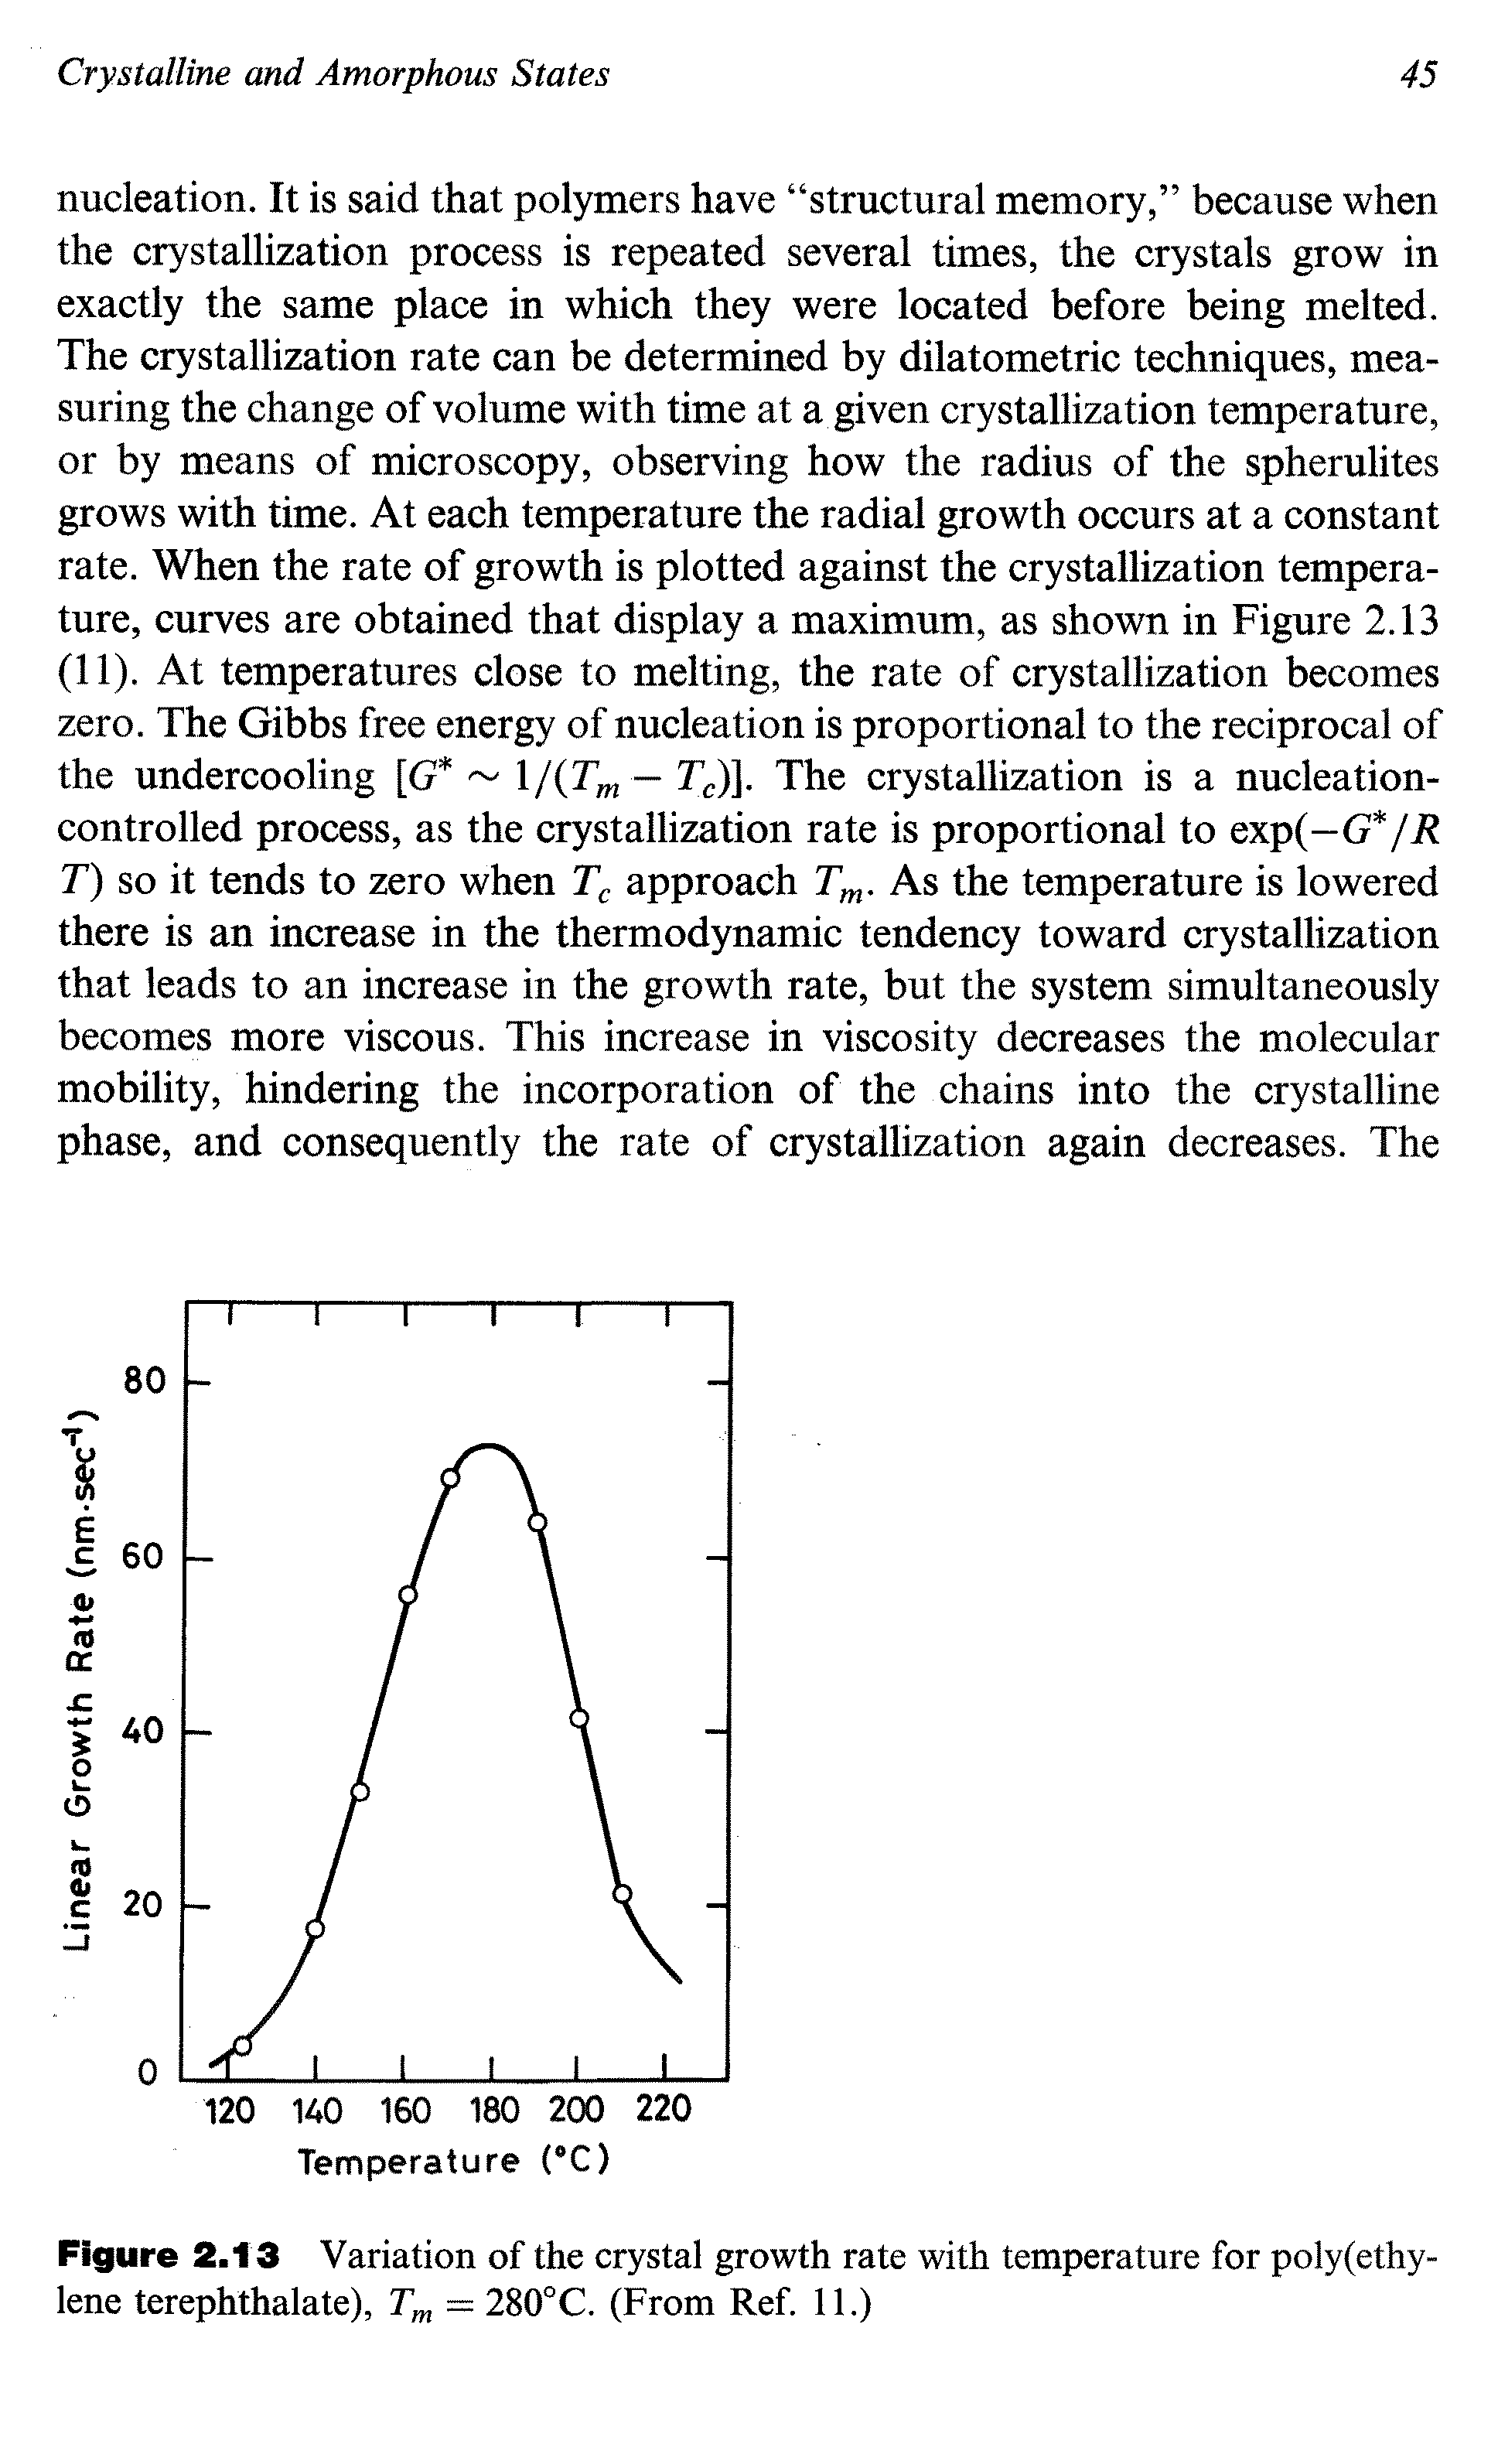 Figure 2.13 Variation of the crystal growth rate with temperature for poly(ethy-lene terephlhalate), T , = 280°C. (From Ref. 11.)...